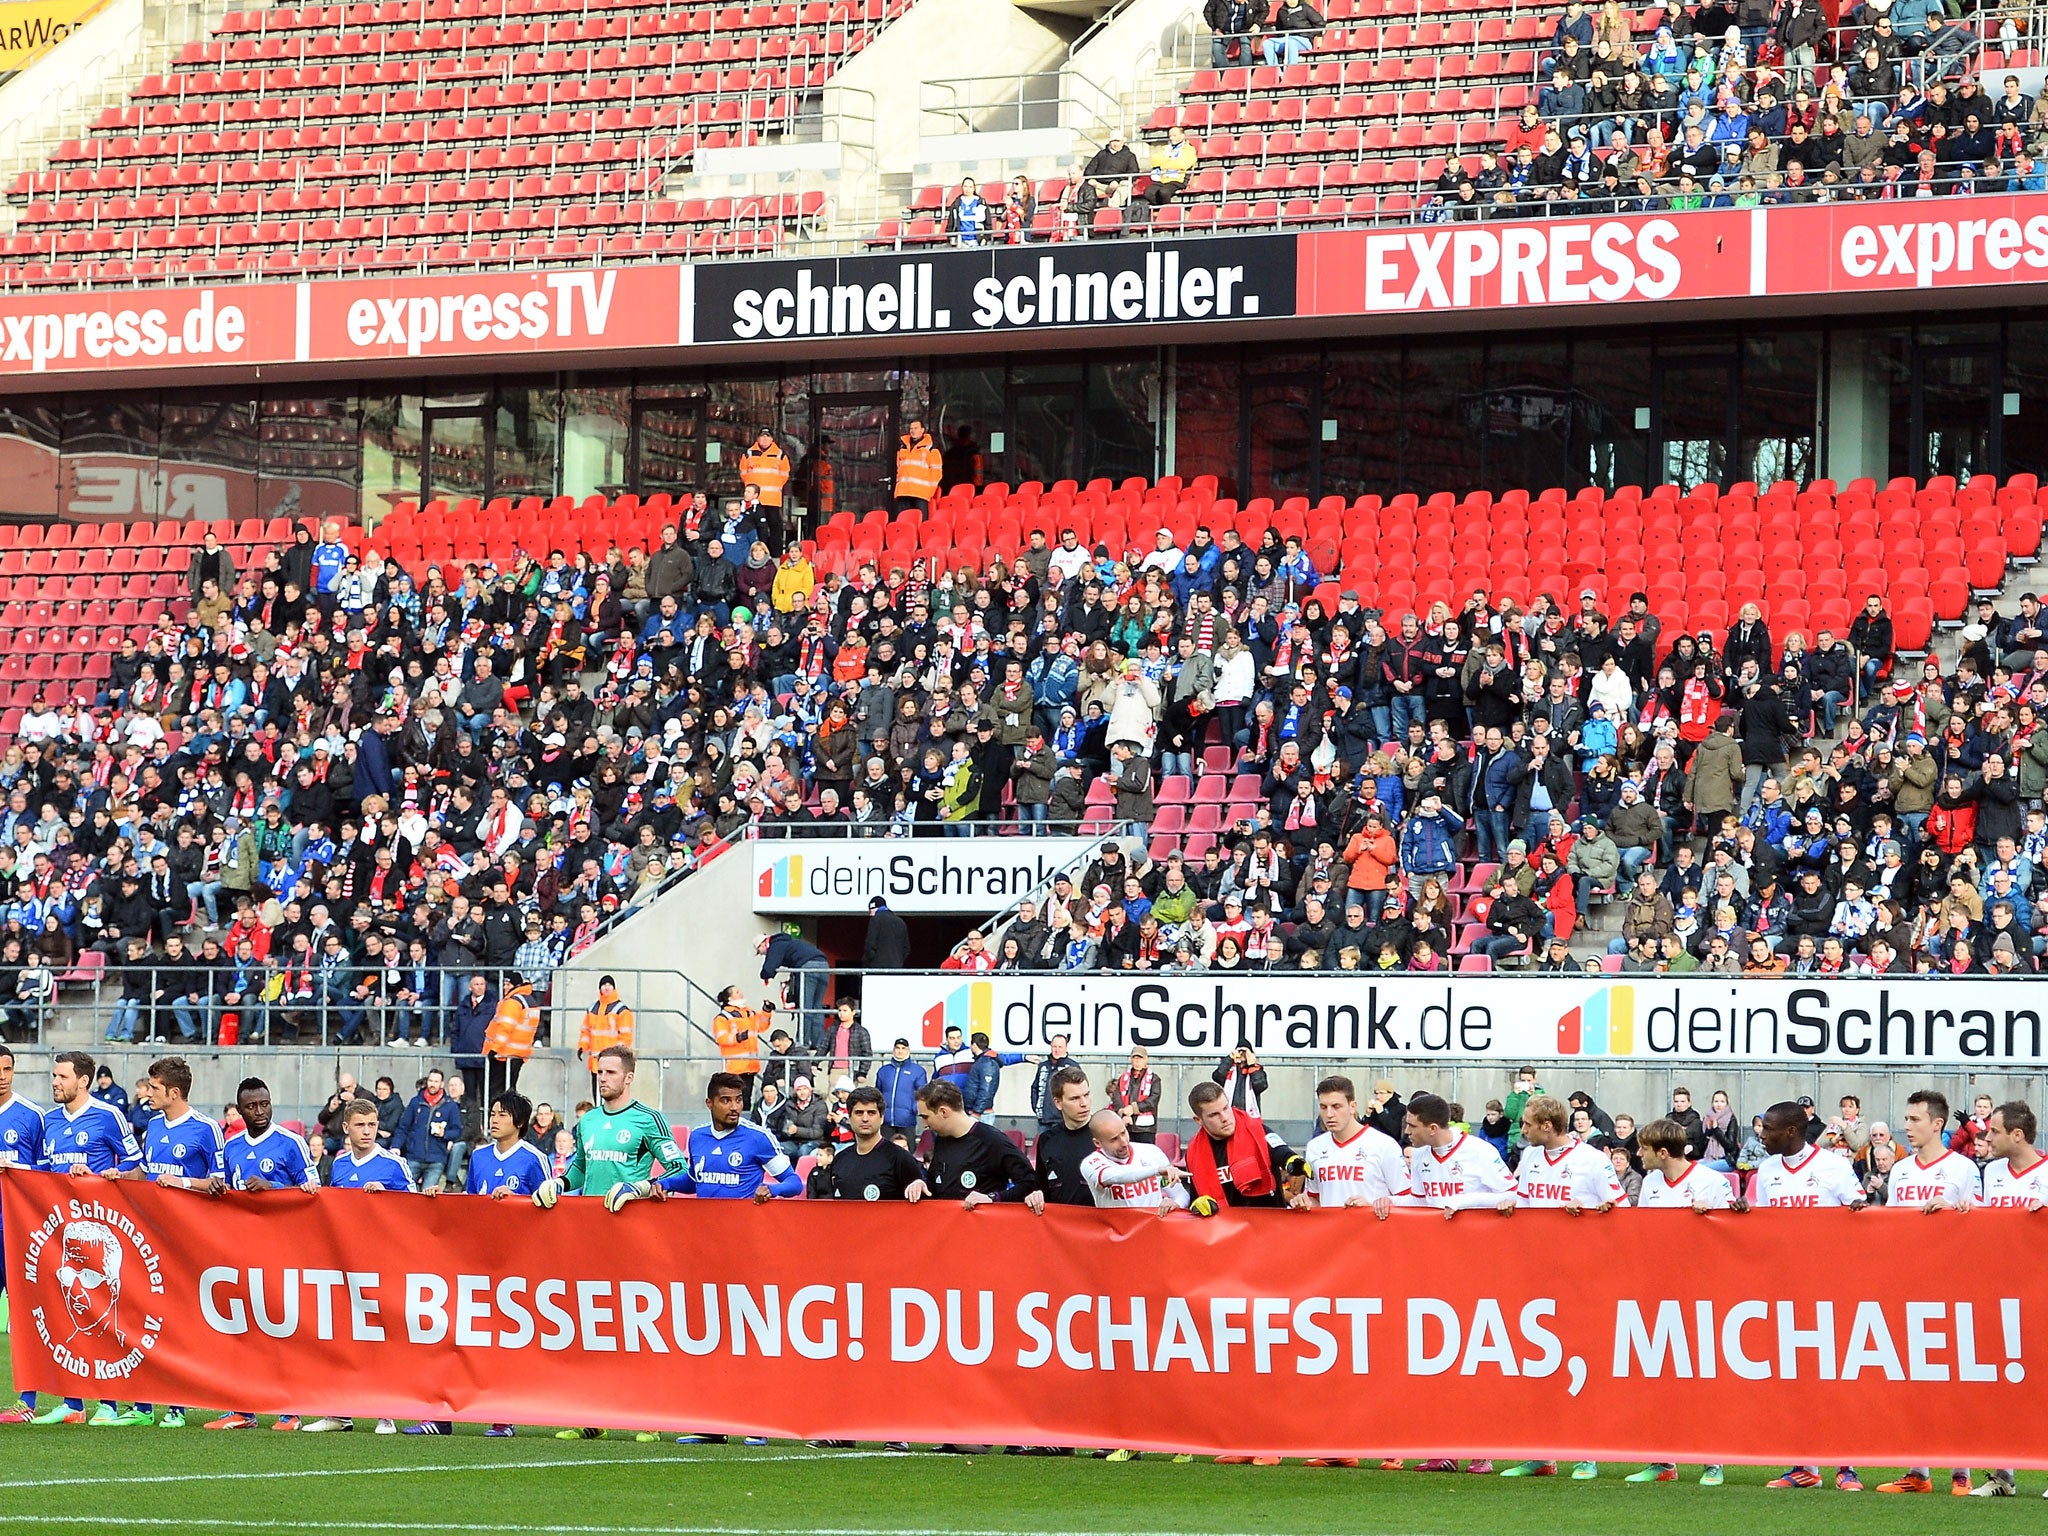 Players from Cologne (R) and Schalke (L) hold up a banner in tribute to Michael Schumacher, who is recovering from serious head injuries after a skiing accident